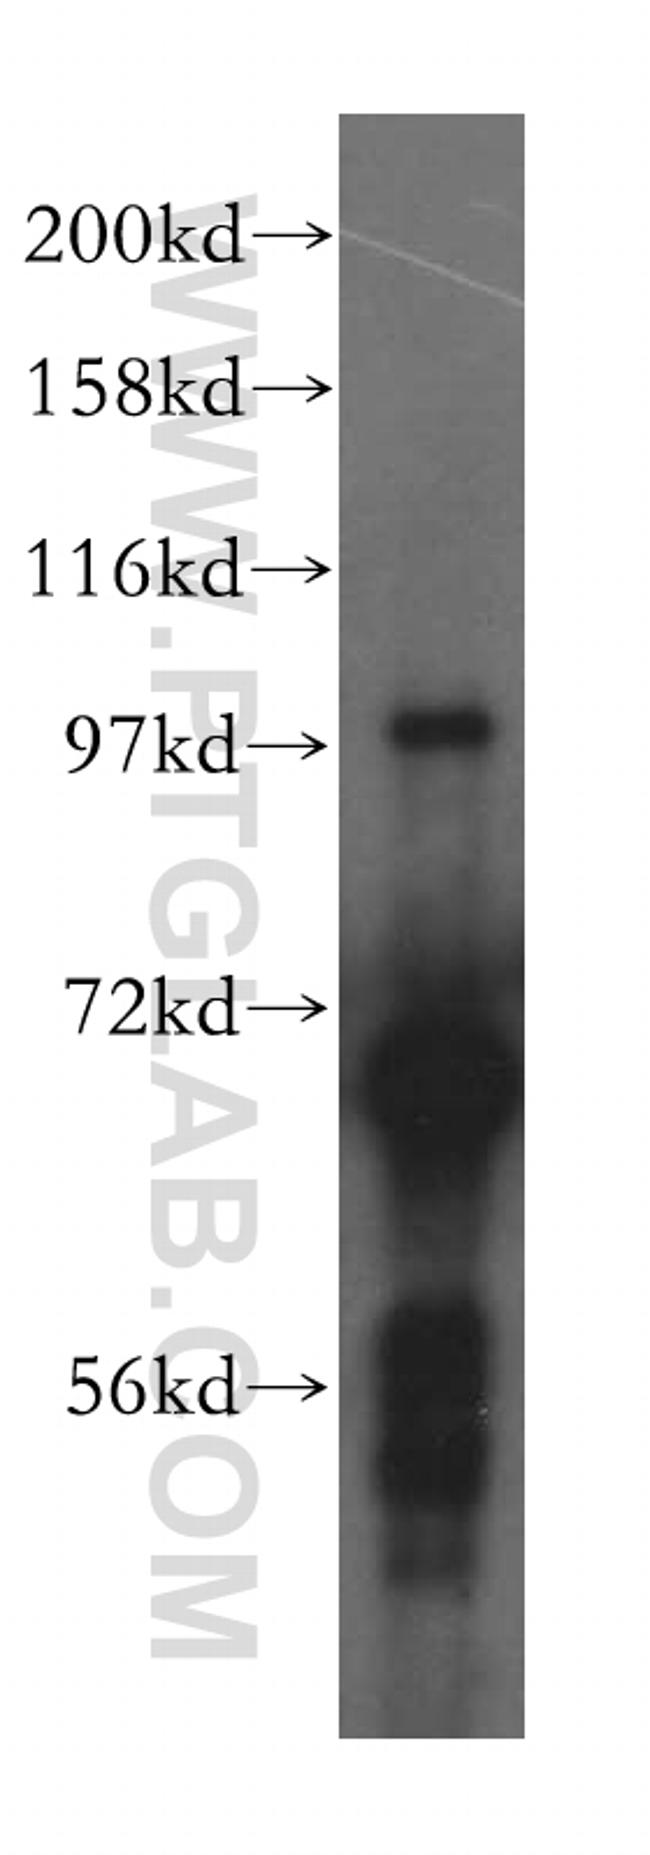 CTP synthase Antibody in Western Blot (WB)